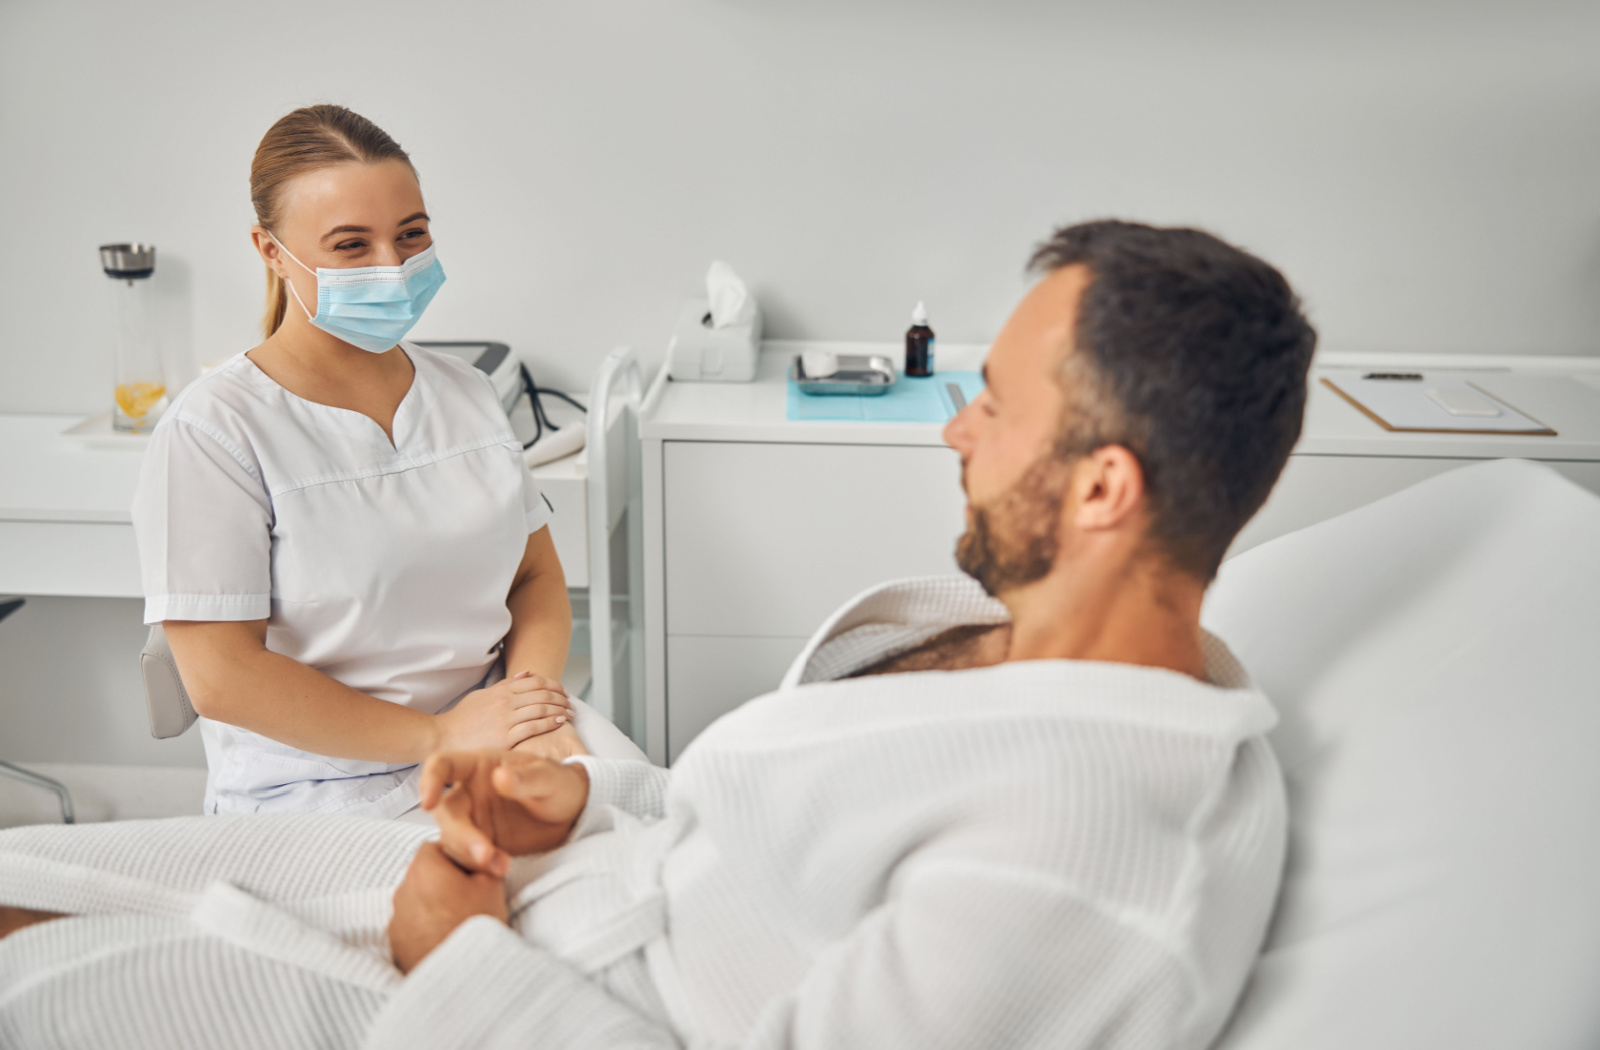 A man lying in a bed and communicating with a female aesthetician wearing a face mask.